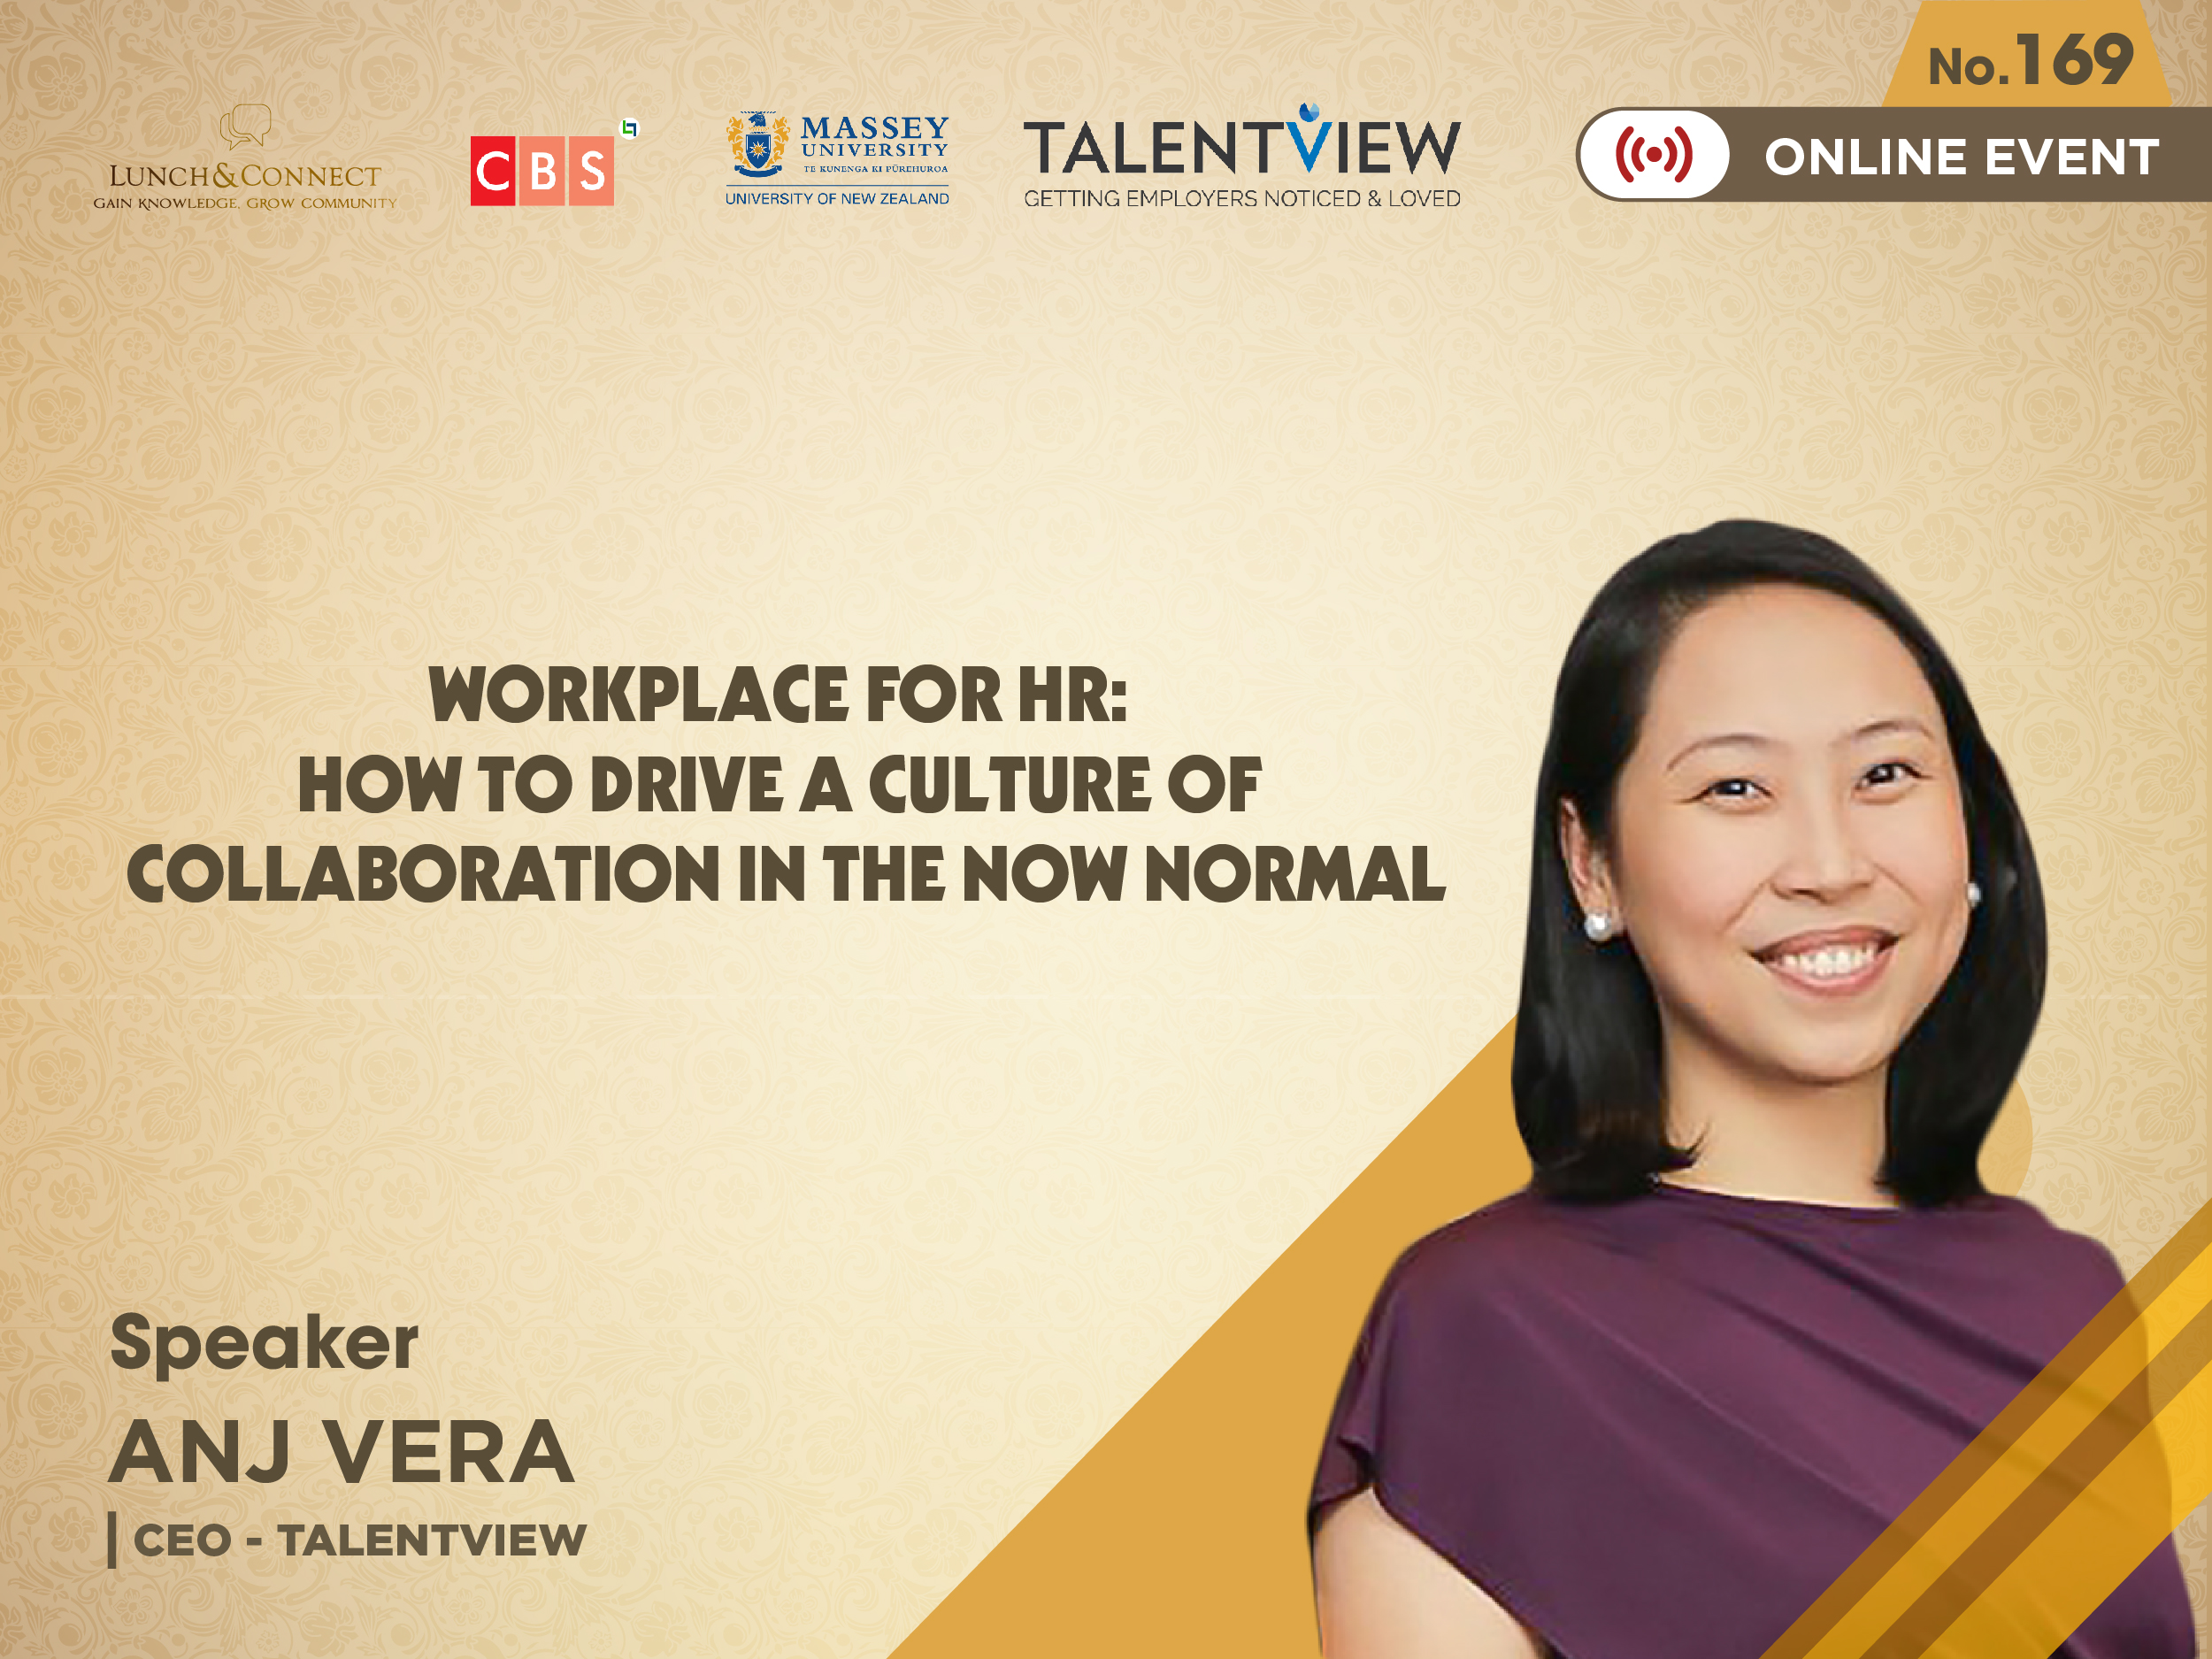 [ Lunch&Connect Số 169 ] HR COMMUNITY – WORKPLACE FOR HR: HOW TO PROMOTE A CULTURE OF COLLABORATION IN THE NOW NORMAL